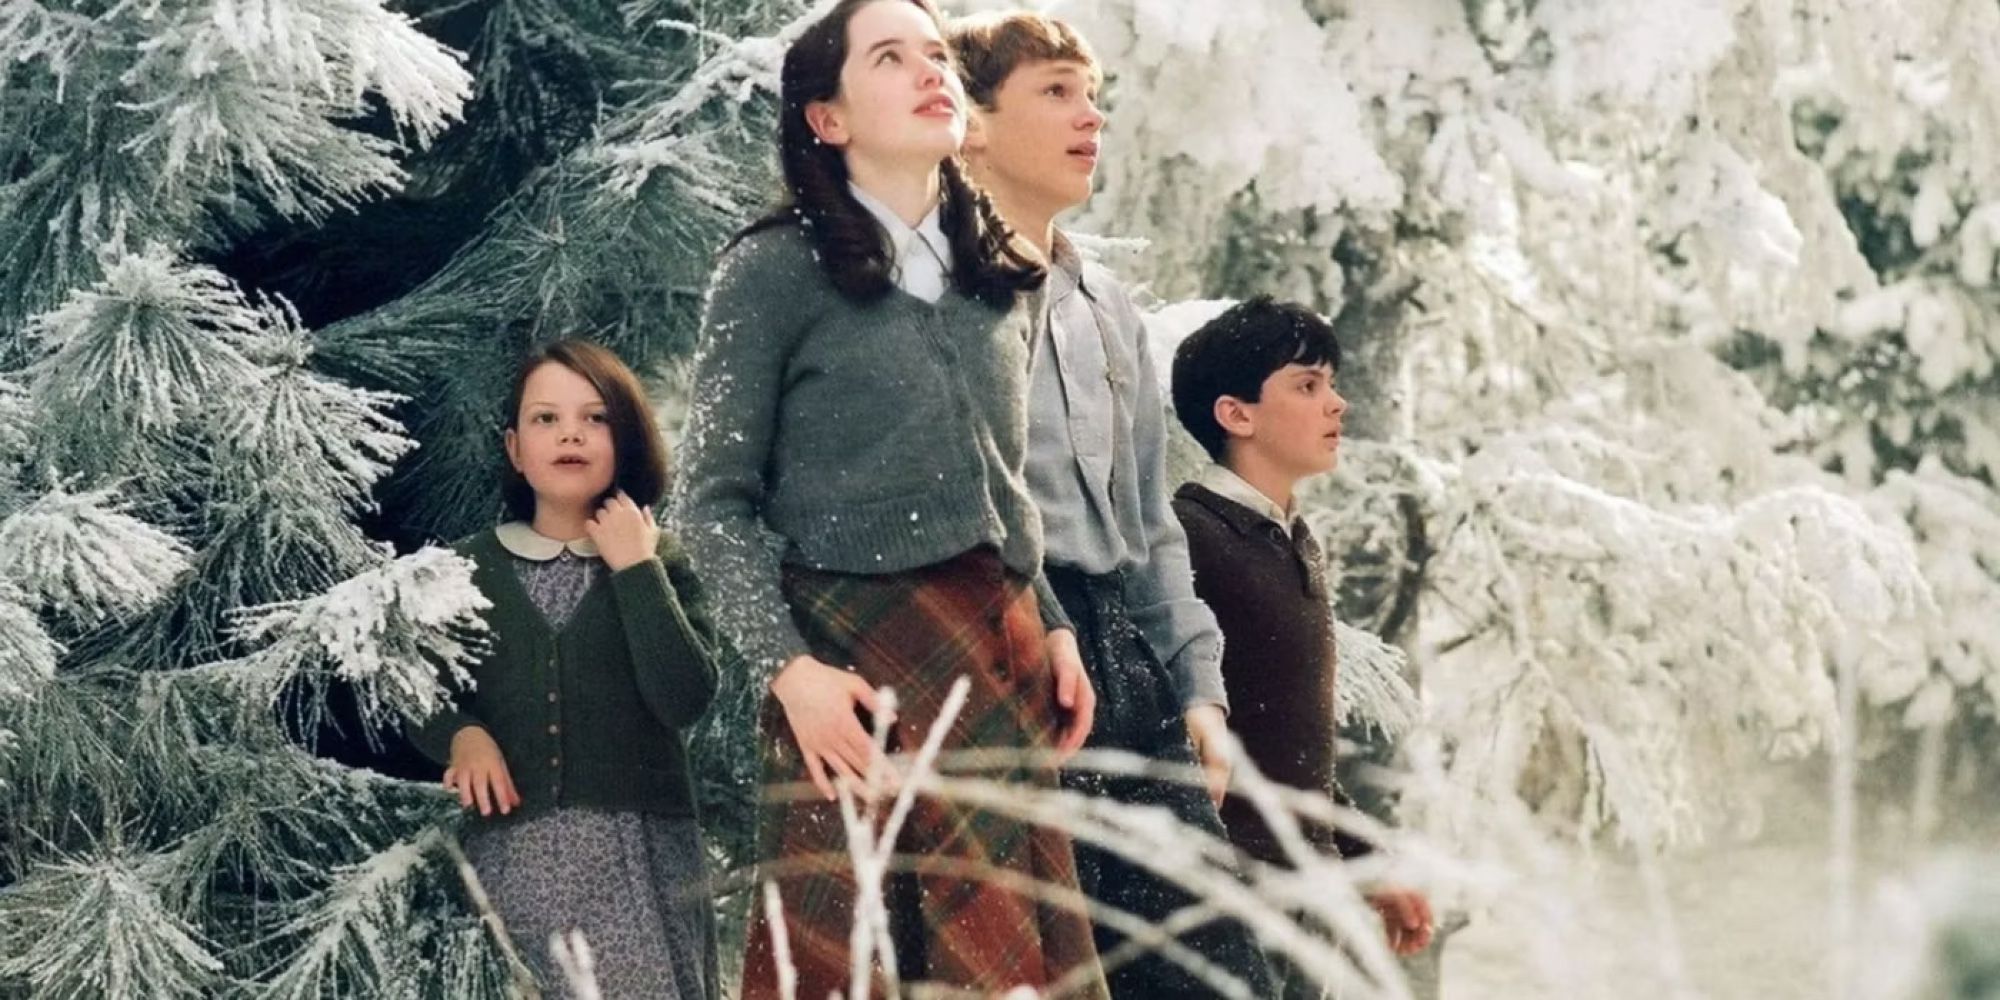 Lucy, Susan, Peter, and Edmund walk out of the trees in The Chronicles of Narnia. 